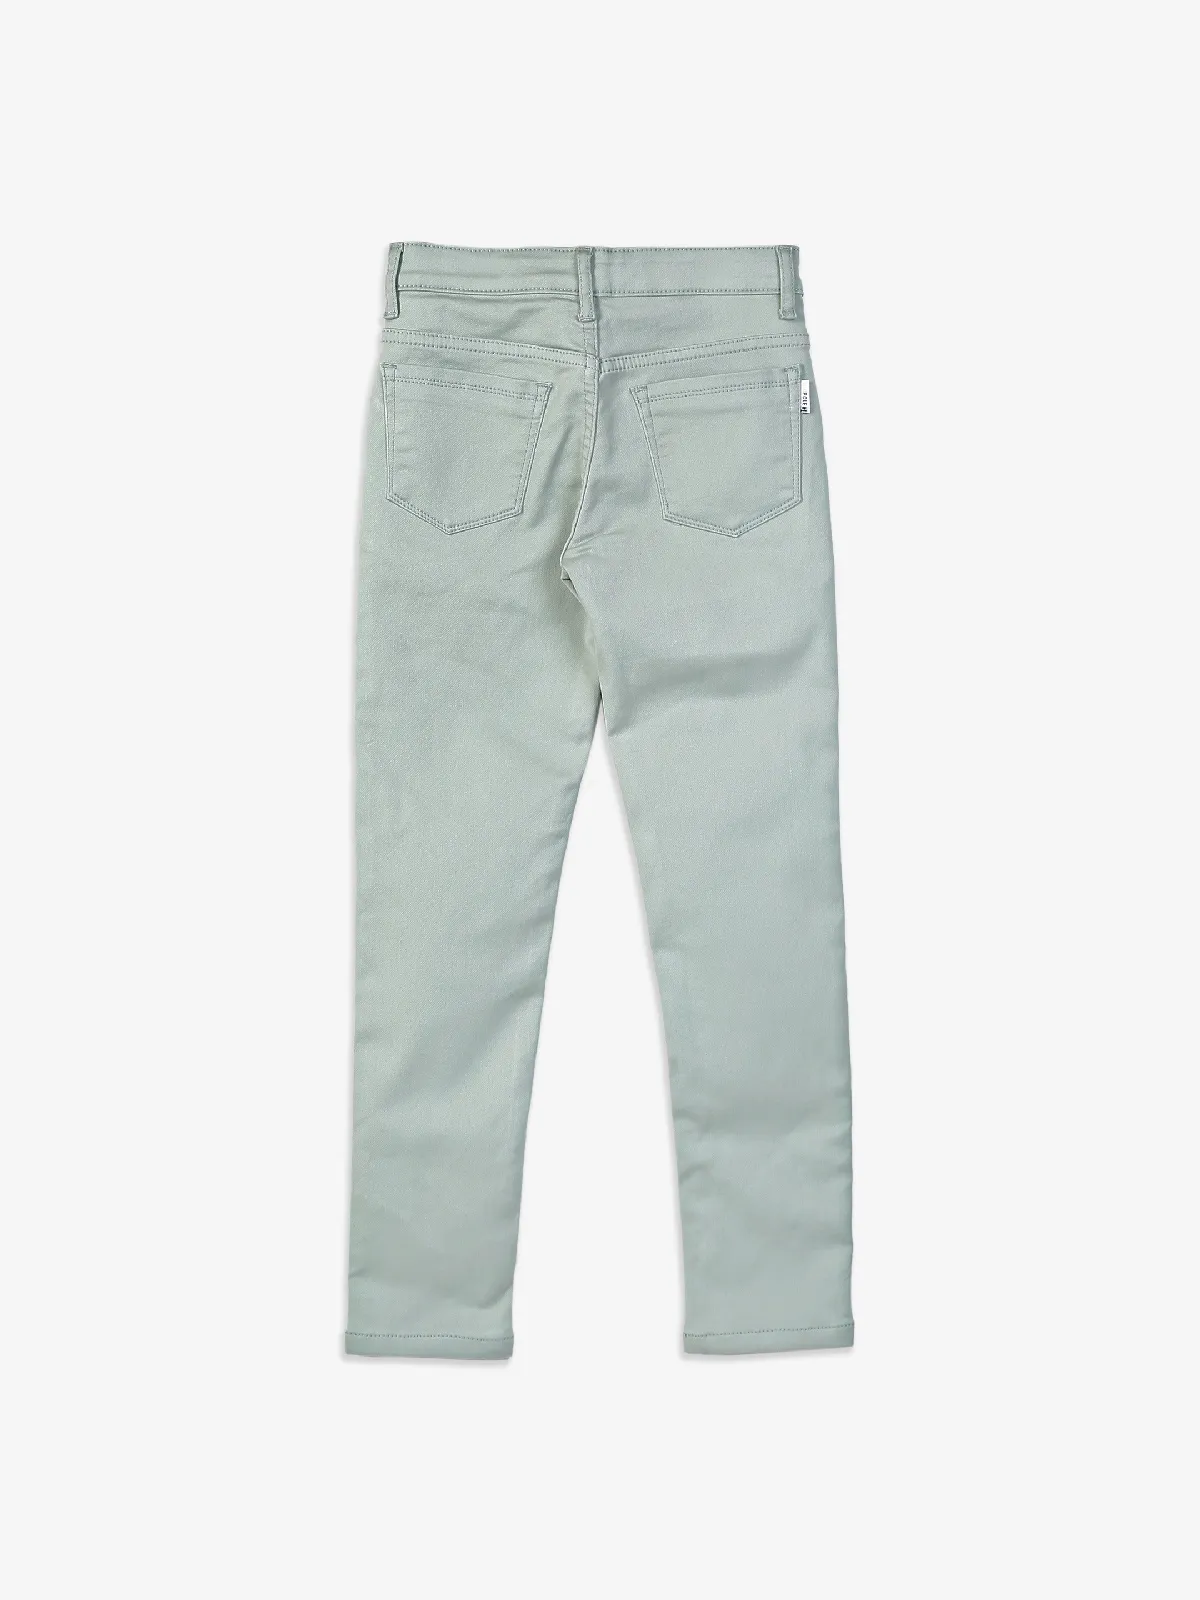 Tadpole sage green solid jeans